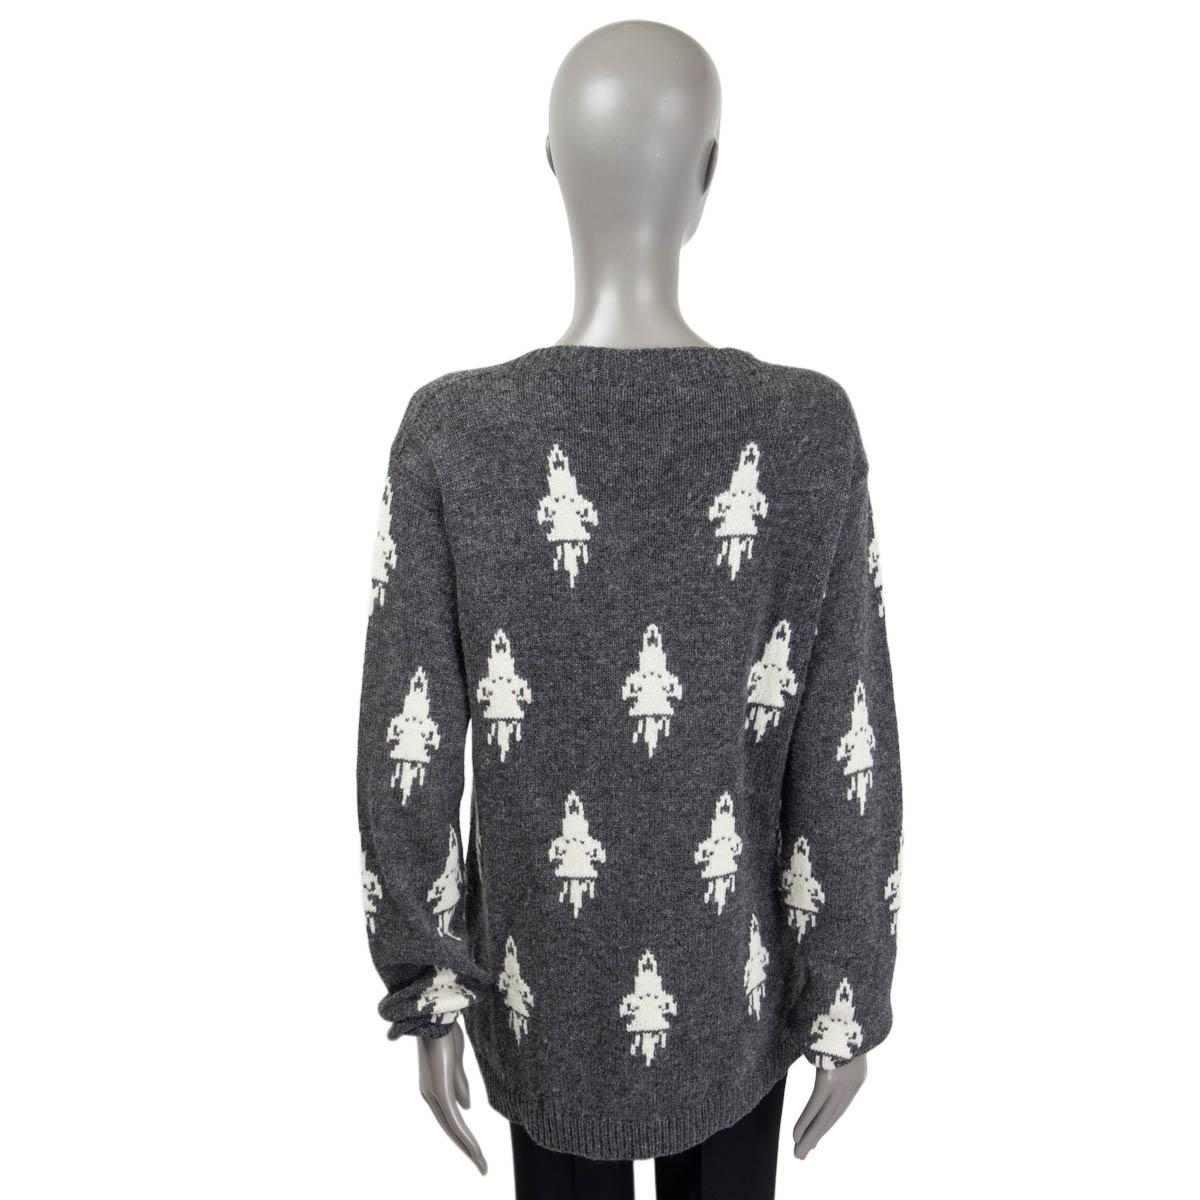 100% authentic Prada oversized long rocket knit sweater in grey and off-white pure shetland wool (please note content tag is missing). Drop shoulders and extra long sleeves. Has been worn and is in excellent condition. 

Spring/summer 2016 mens